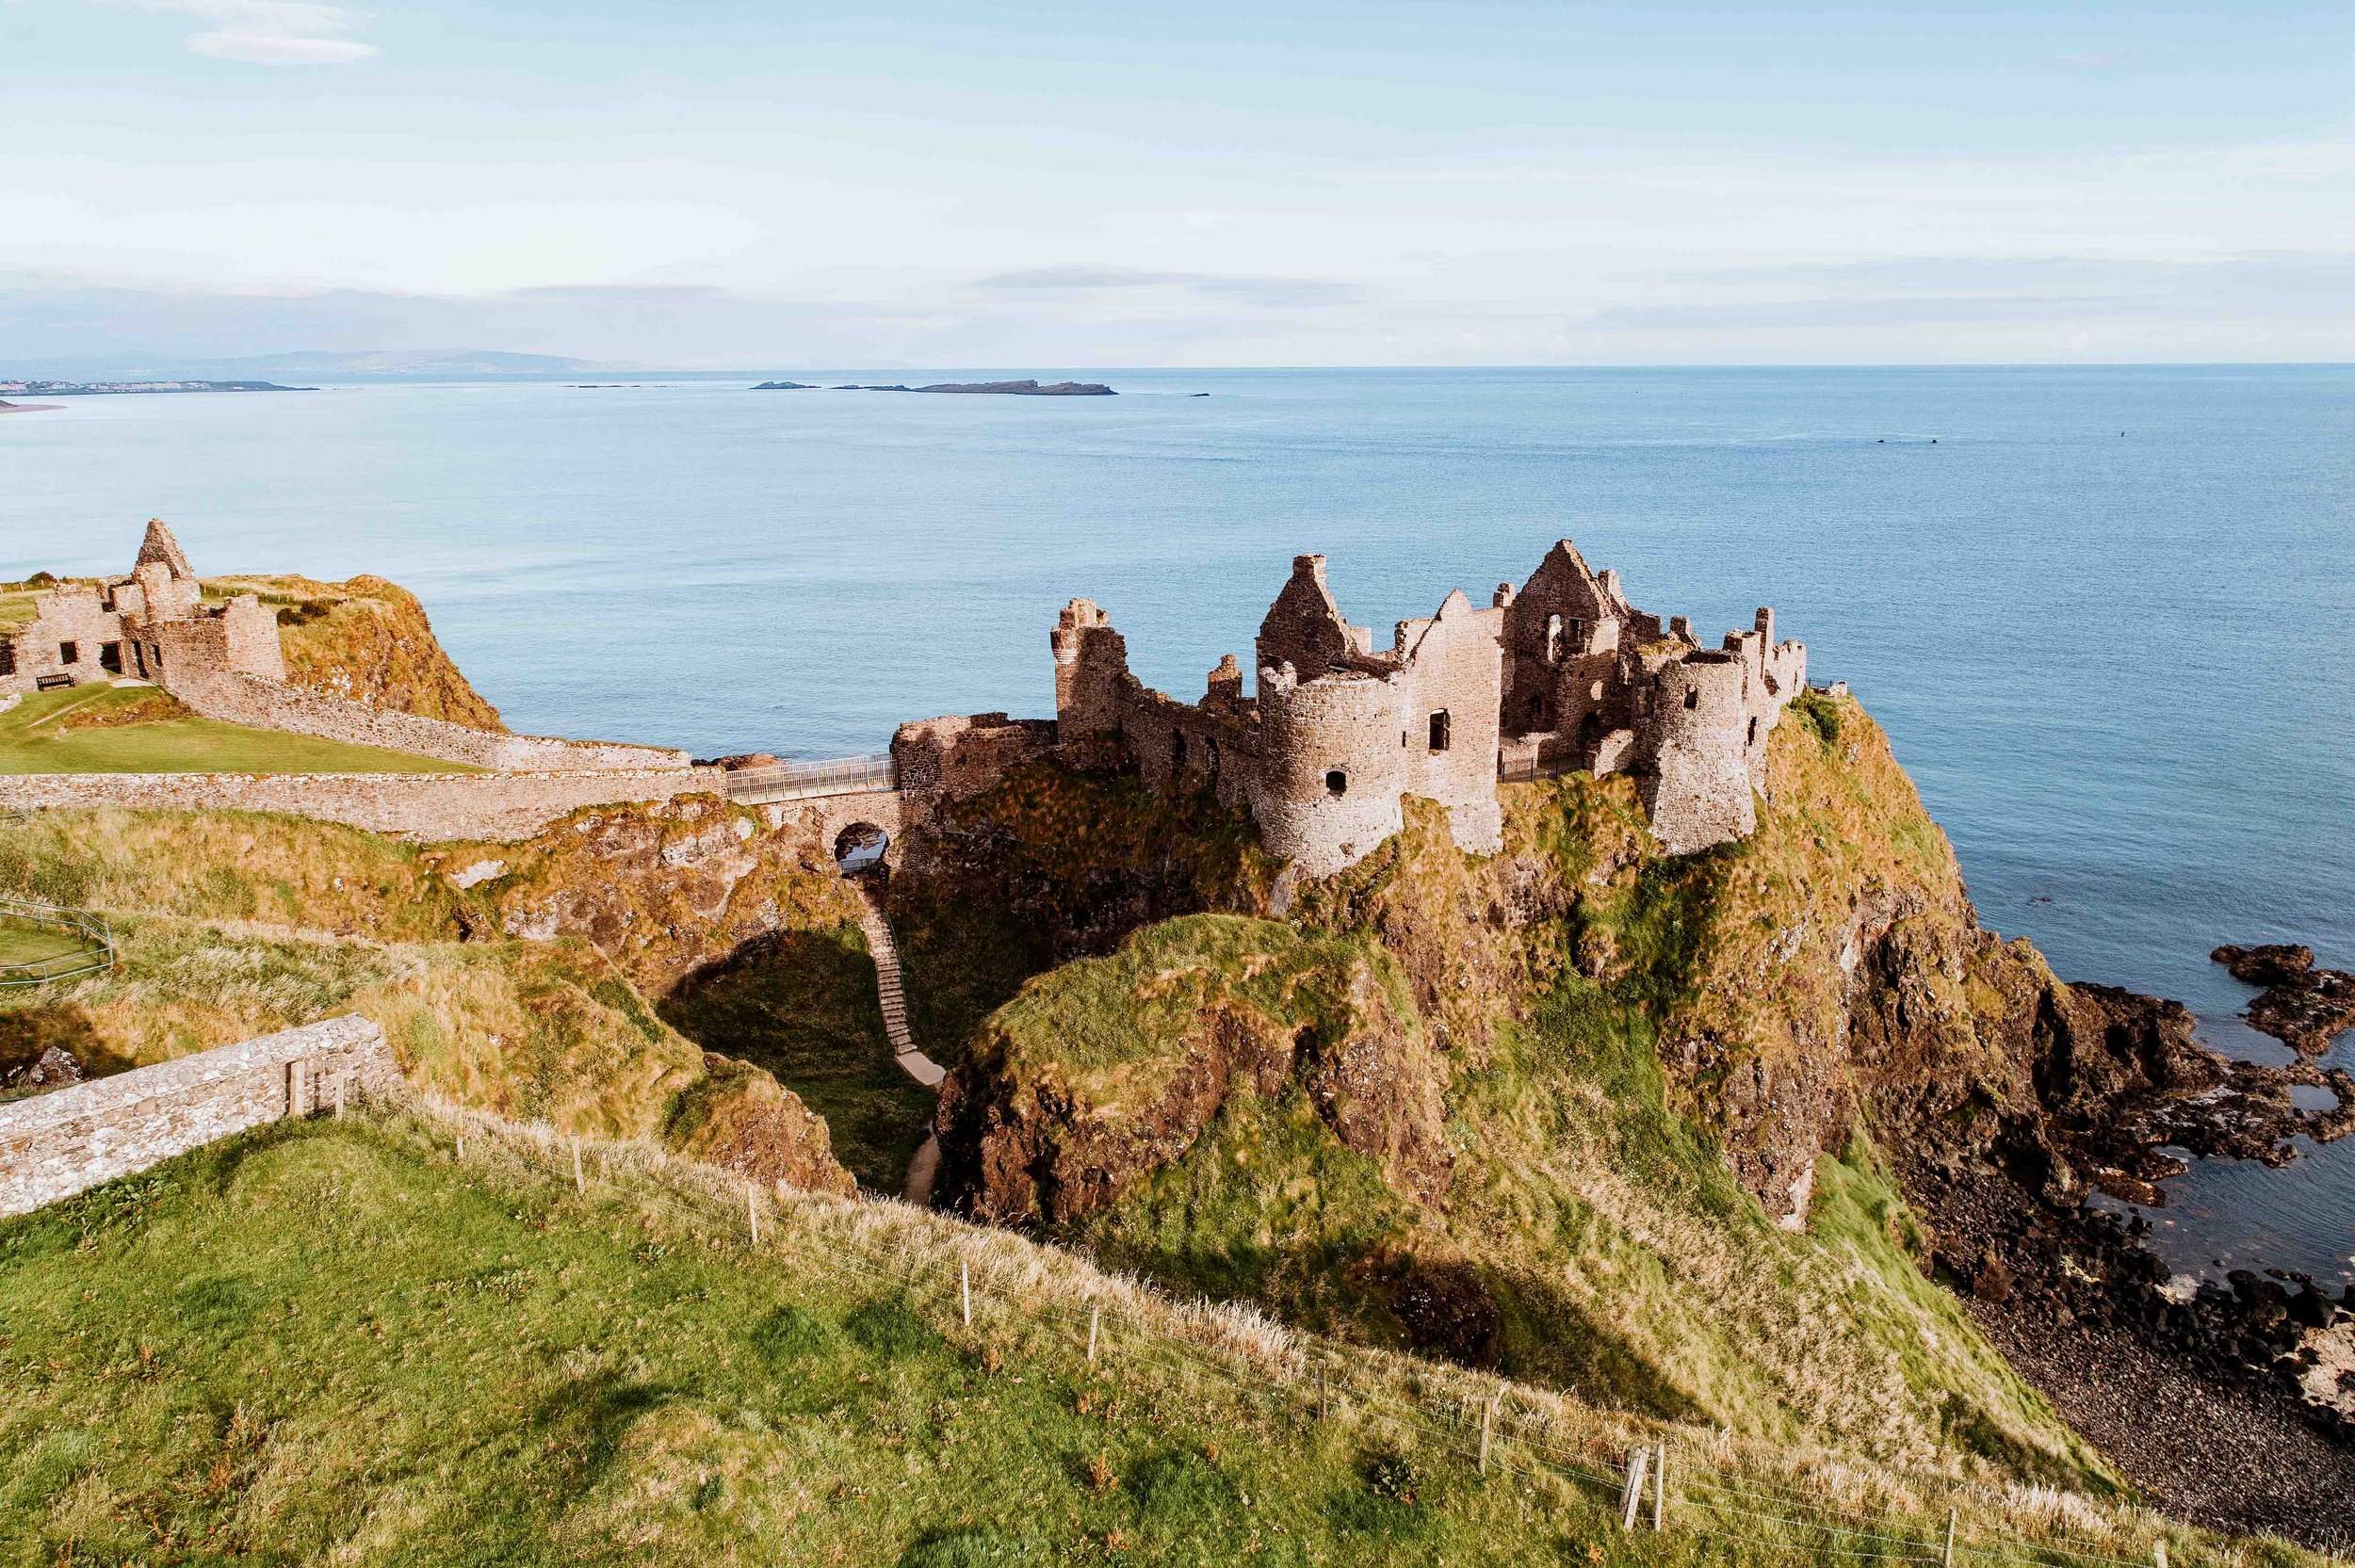 Dunluce castle in game of thrones opening hours